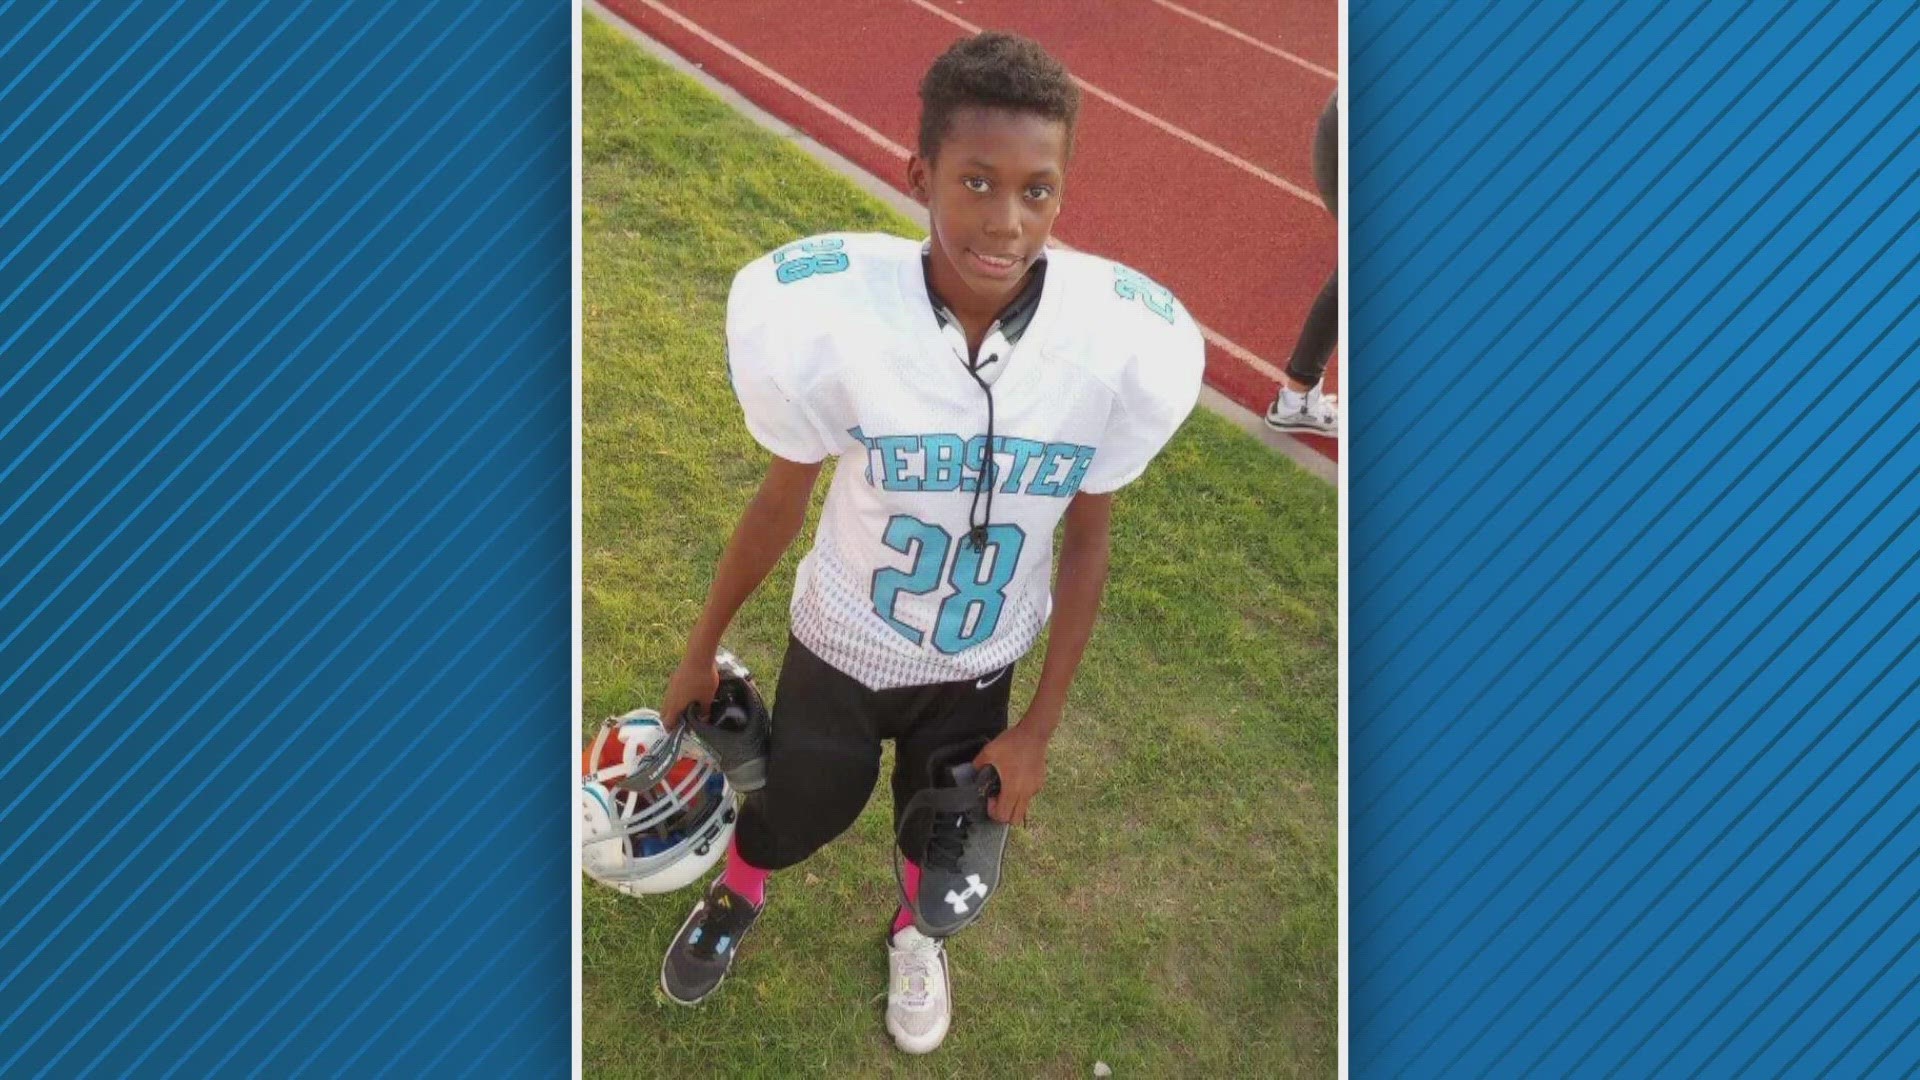 13-year-old Kameron Turner was hit on Kings Road last Wednesday. He died Monday afternoon. His heart will be donated to another child.